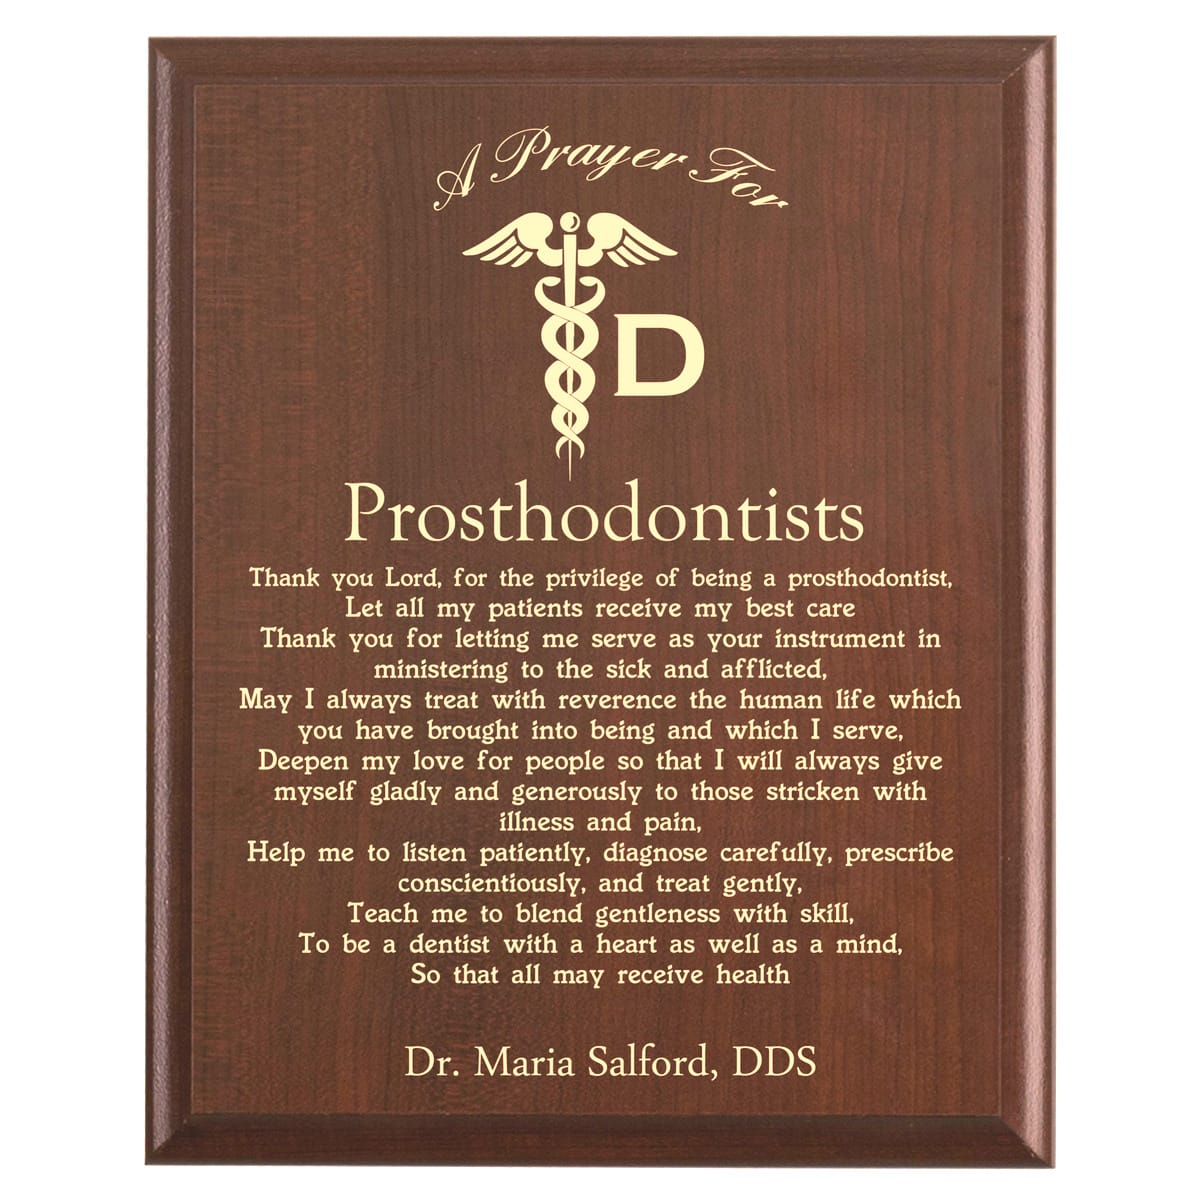 Plaque photo: Prosthodontist Prayer Plaque design with free personalization. Wood style finish with customized text.